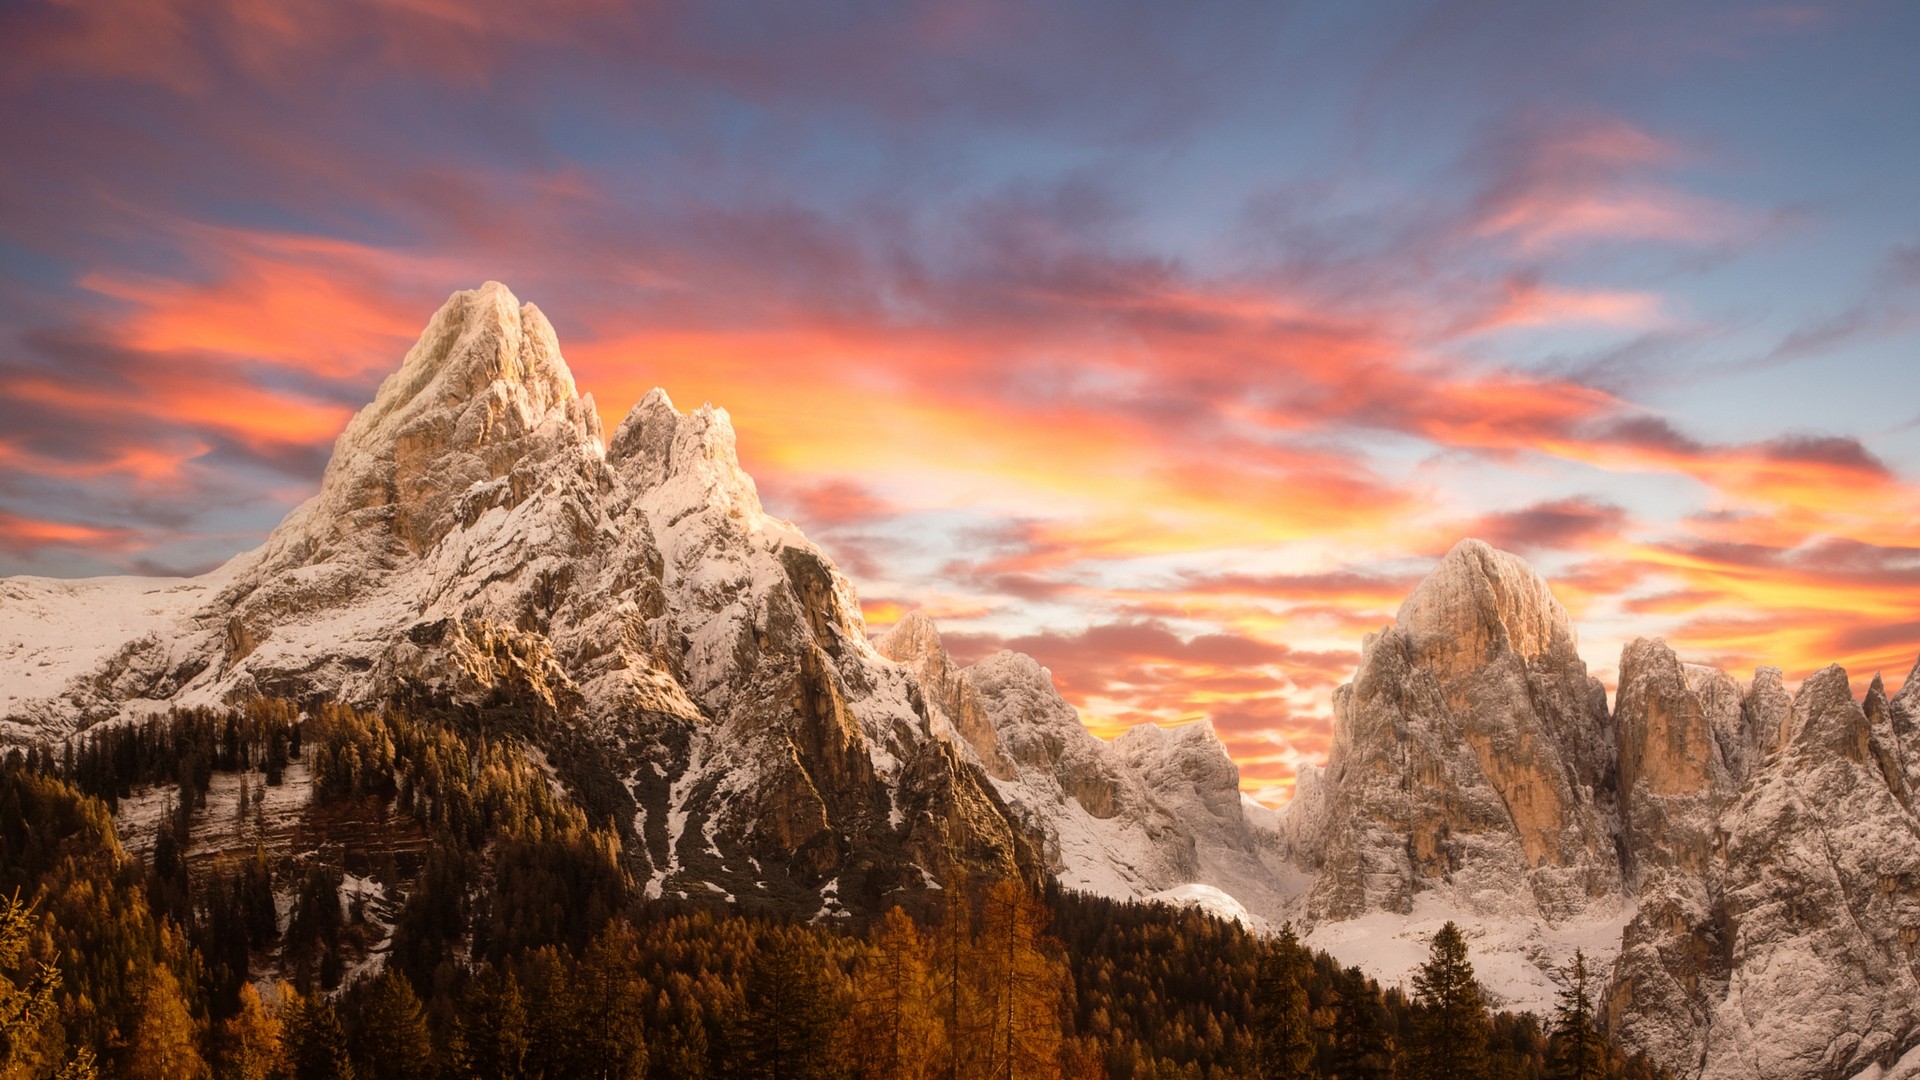 General 1920x1080 nature landscape sunset mountains snowy peak sky forest fall Dolomites Italy snowy mountain